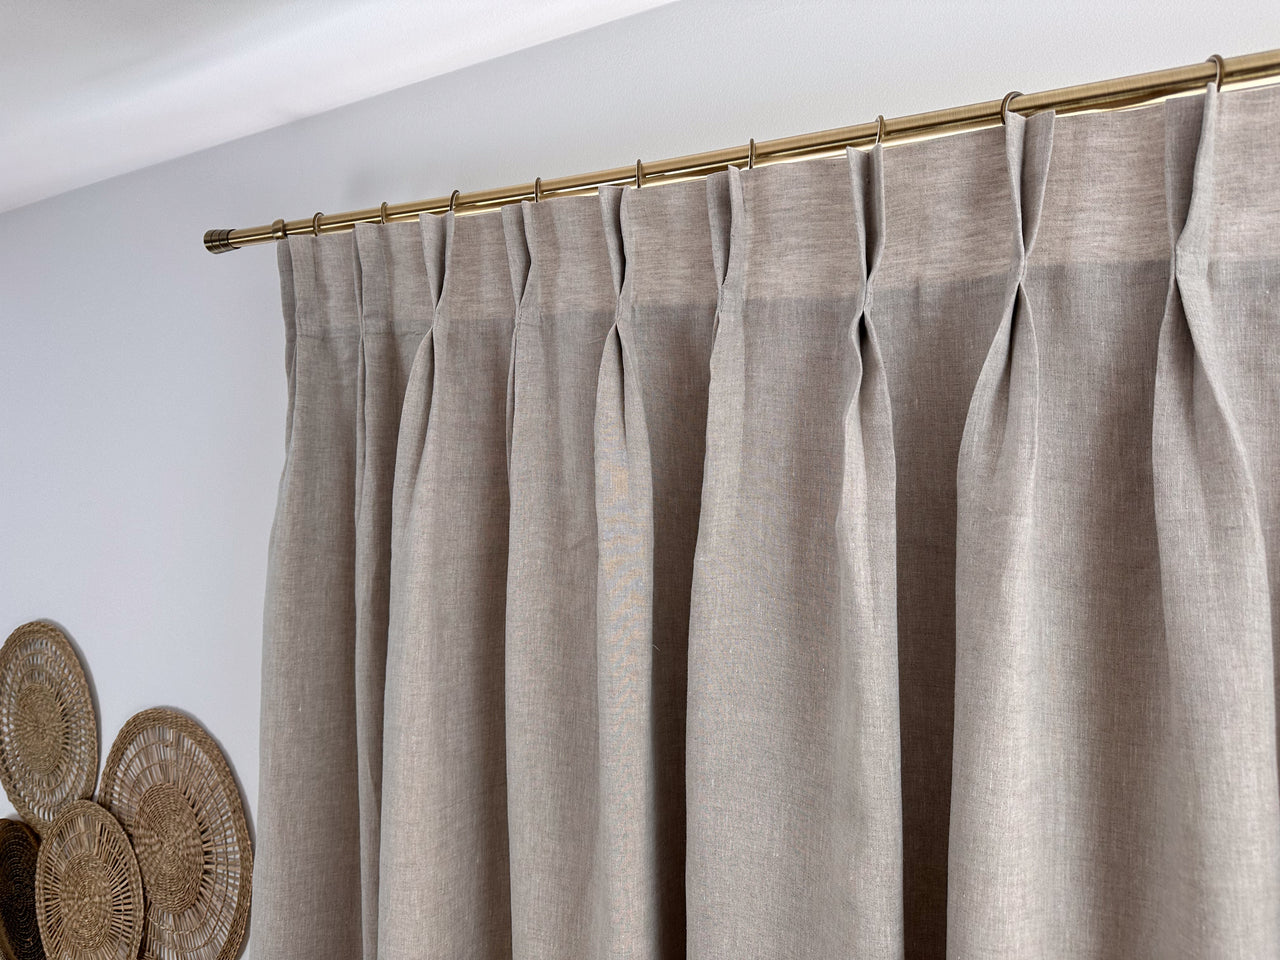 Double Pinch Pleat Linen Curtain Panel with Blackout Lining - Heading for Rings and Hooks - Total or Partial Darkening